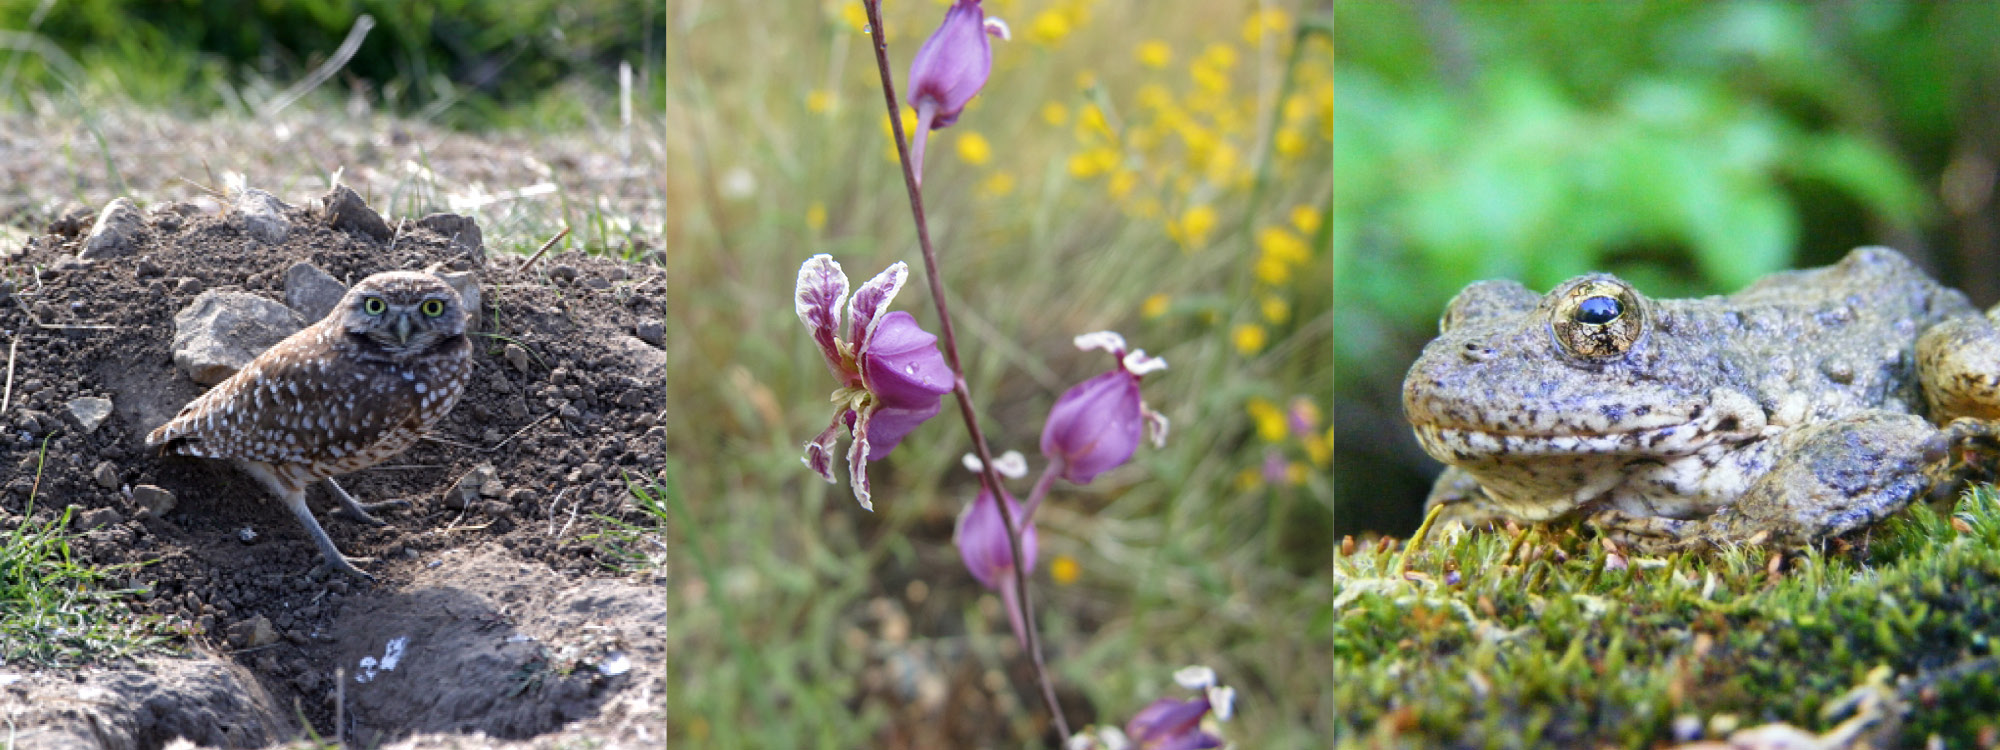 Photo collage with burrowing owl next to burrow, purple jewelflower, and Foothill yellow-legged frog sitting on moss